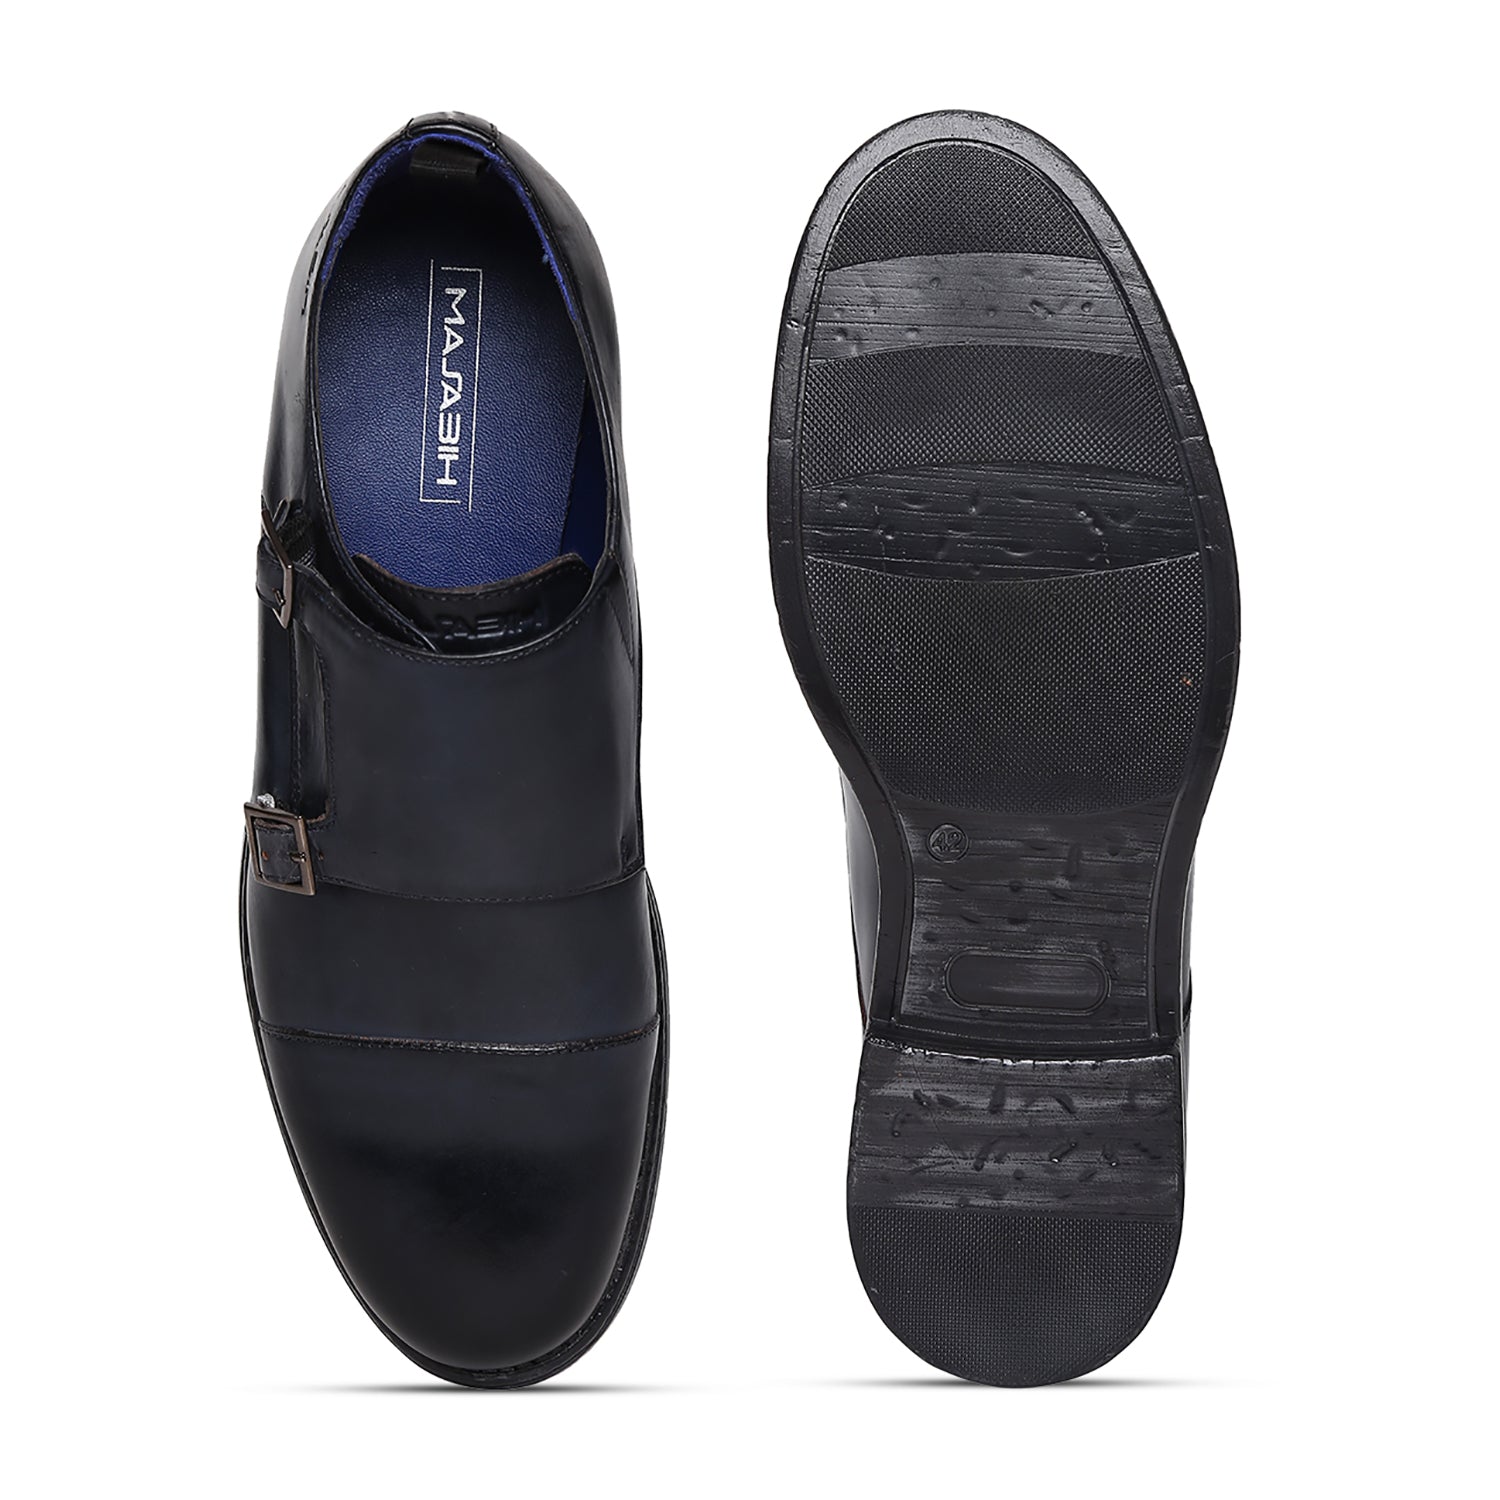 MASABIH GENUINE LEATHER NAVY CASUAL DOUBLE MONK SHOES FOR MEN